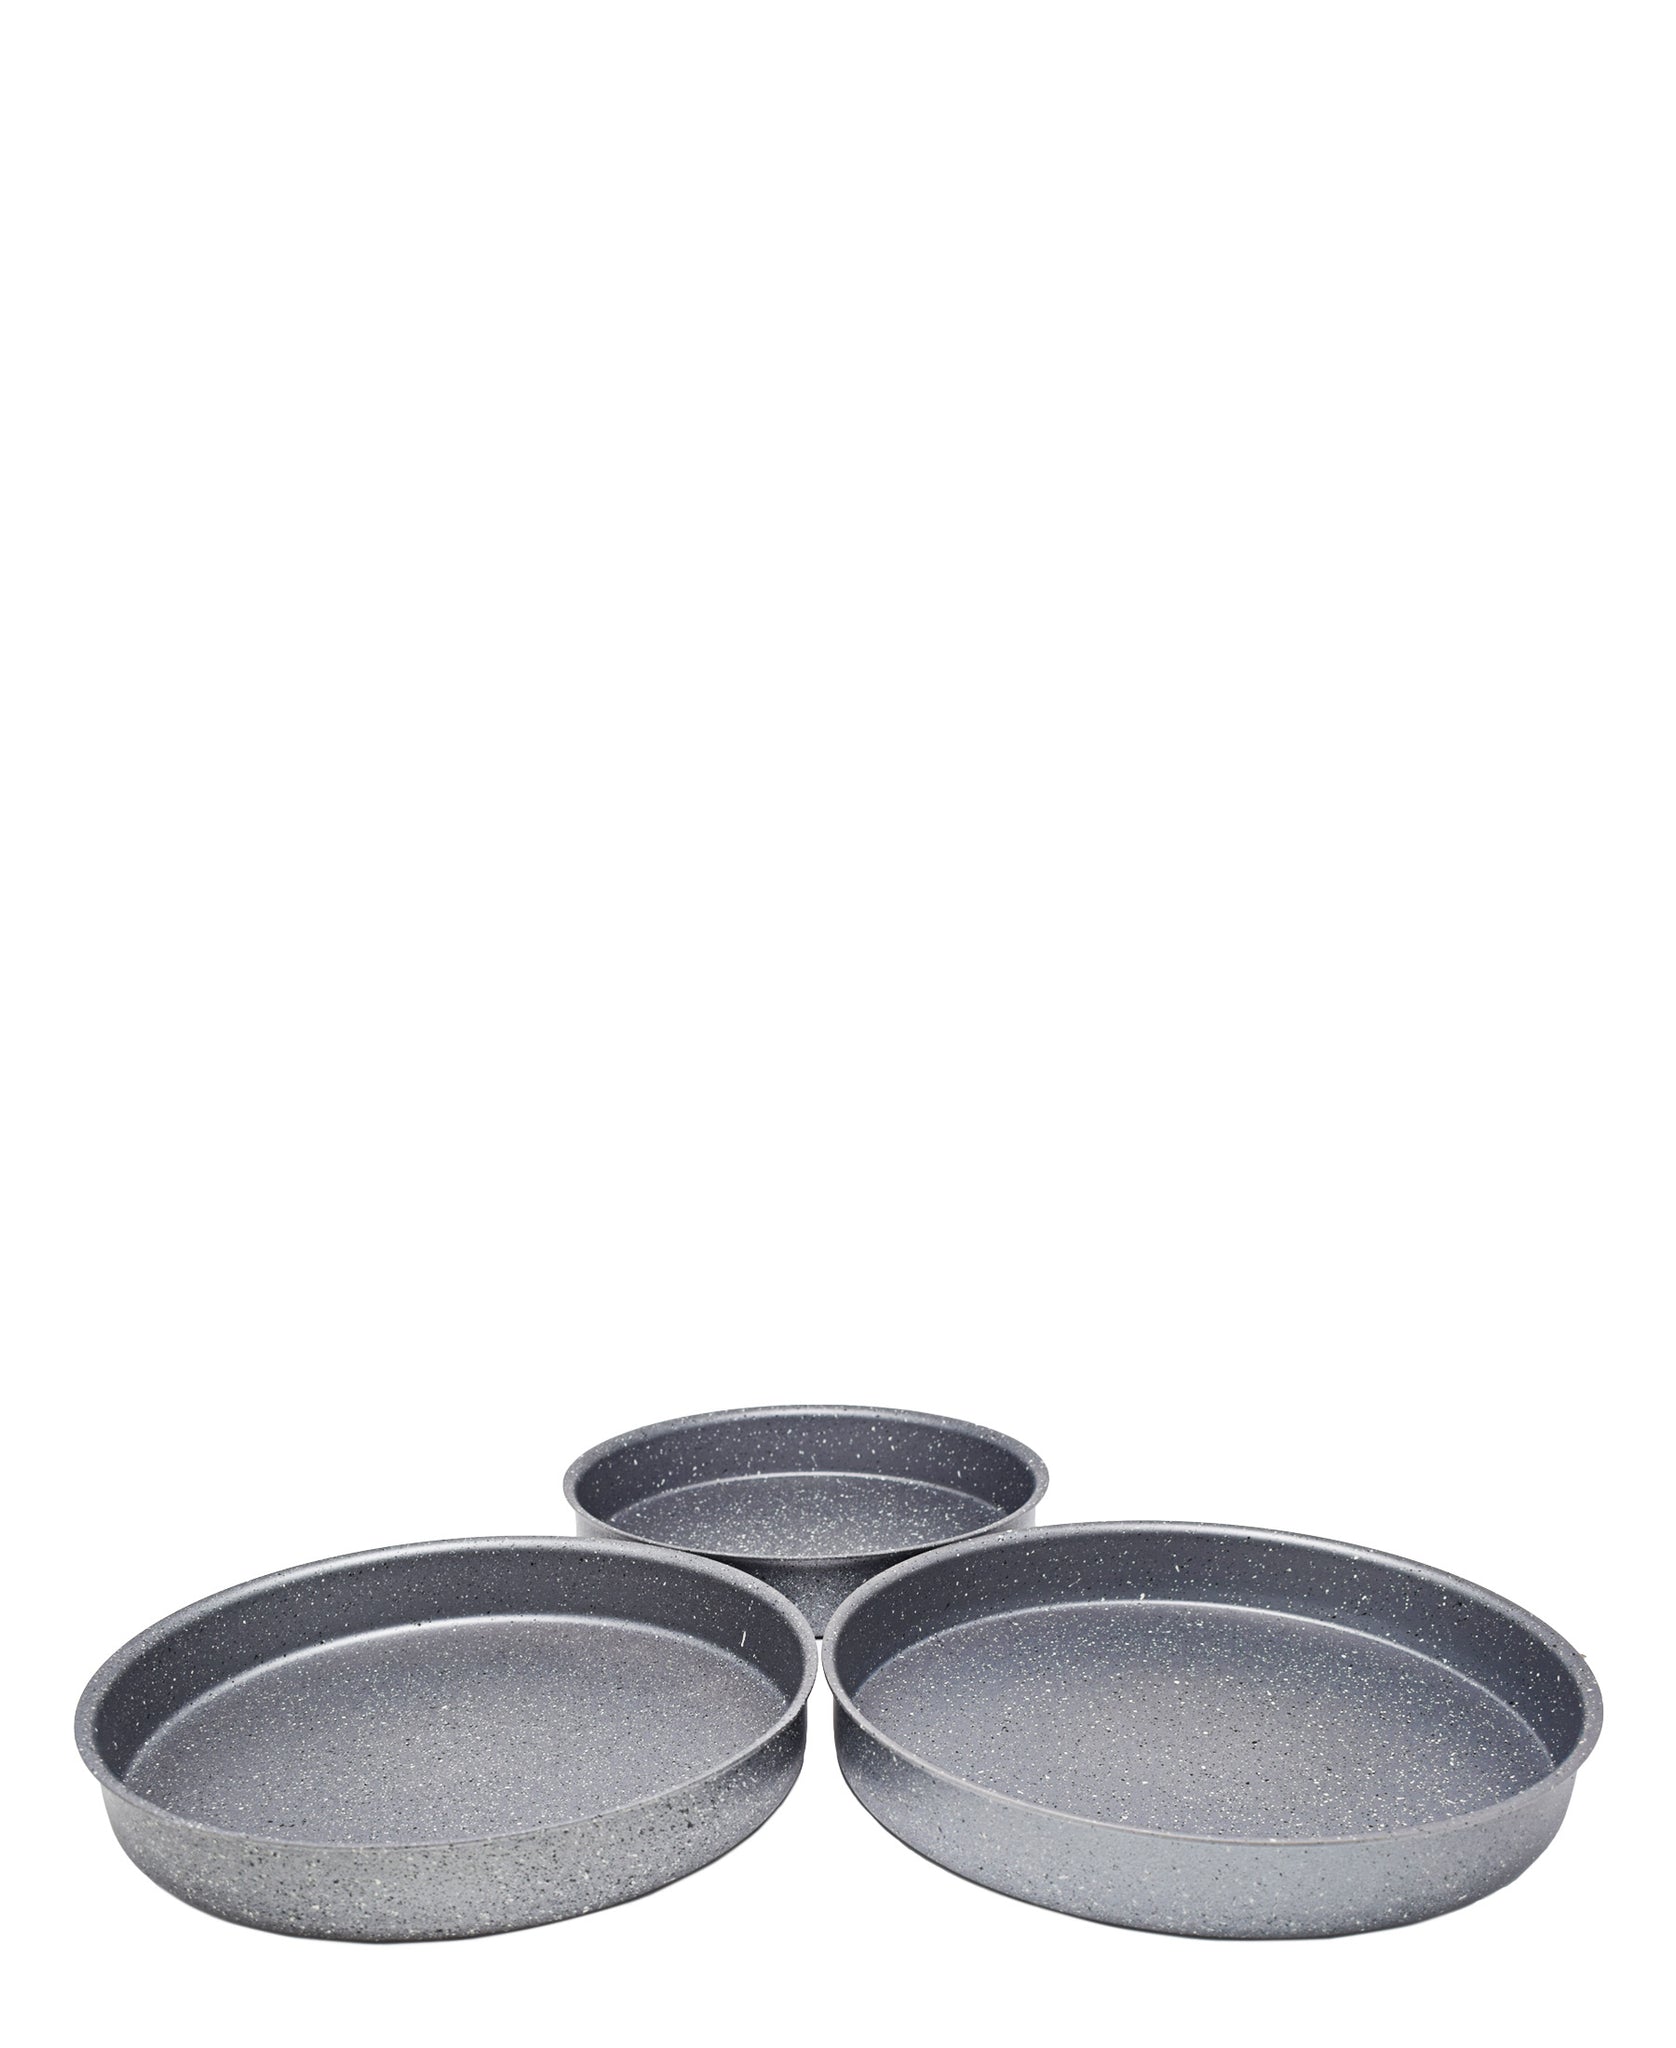 OMS 3 Piece Granite Oven Tray Set - Grey